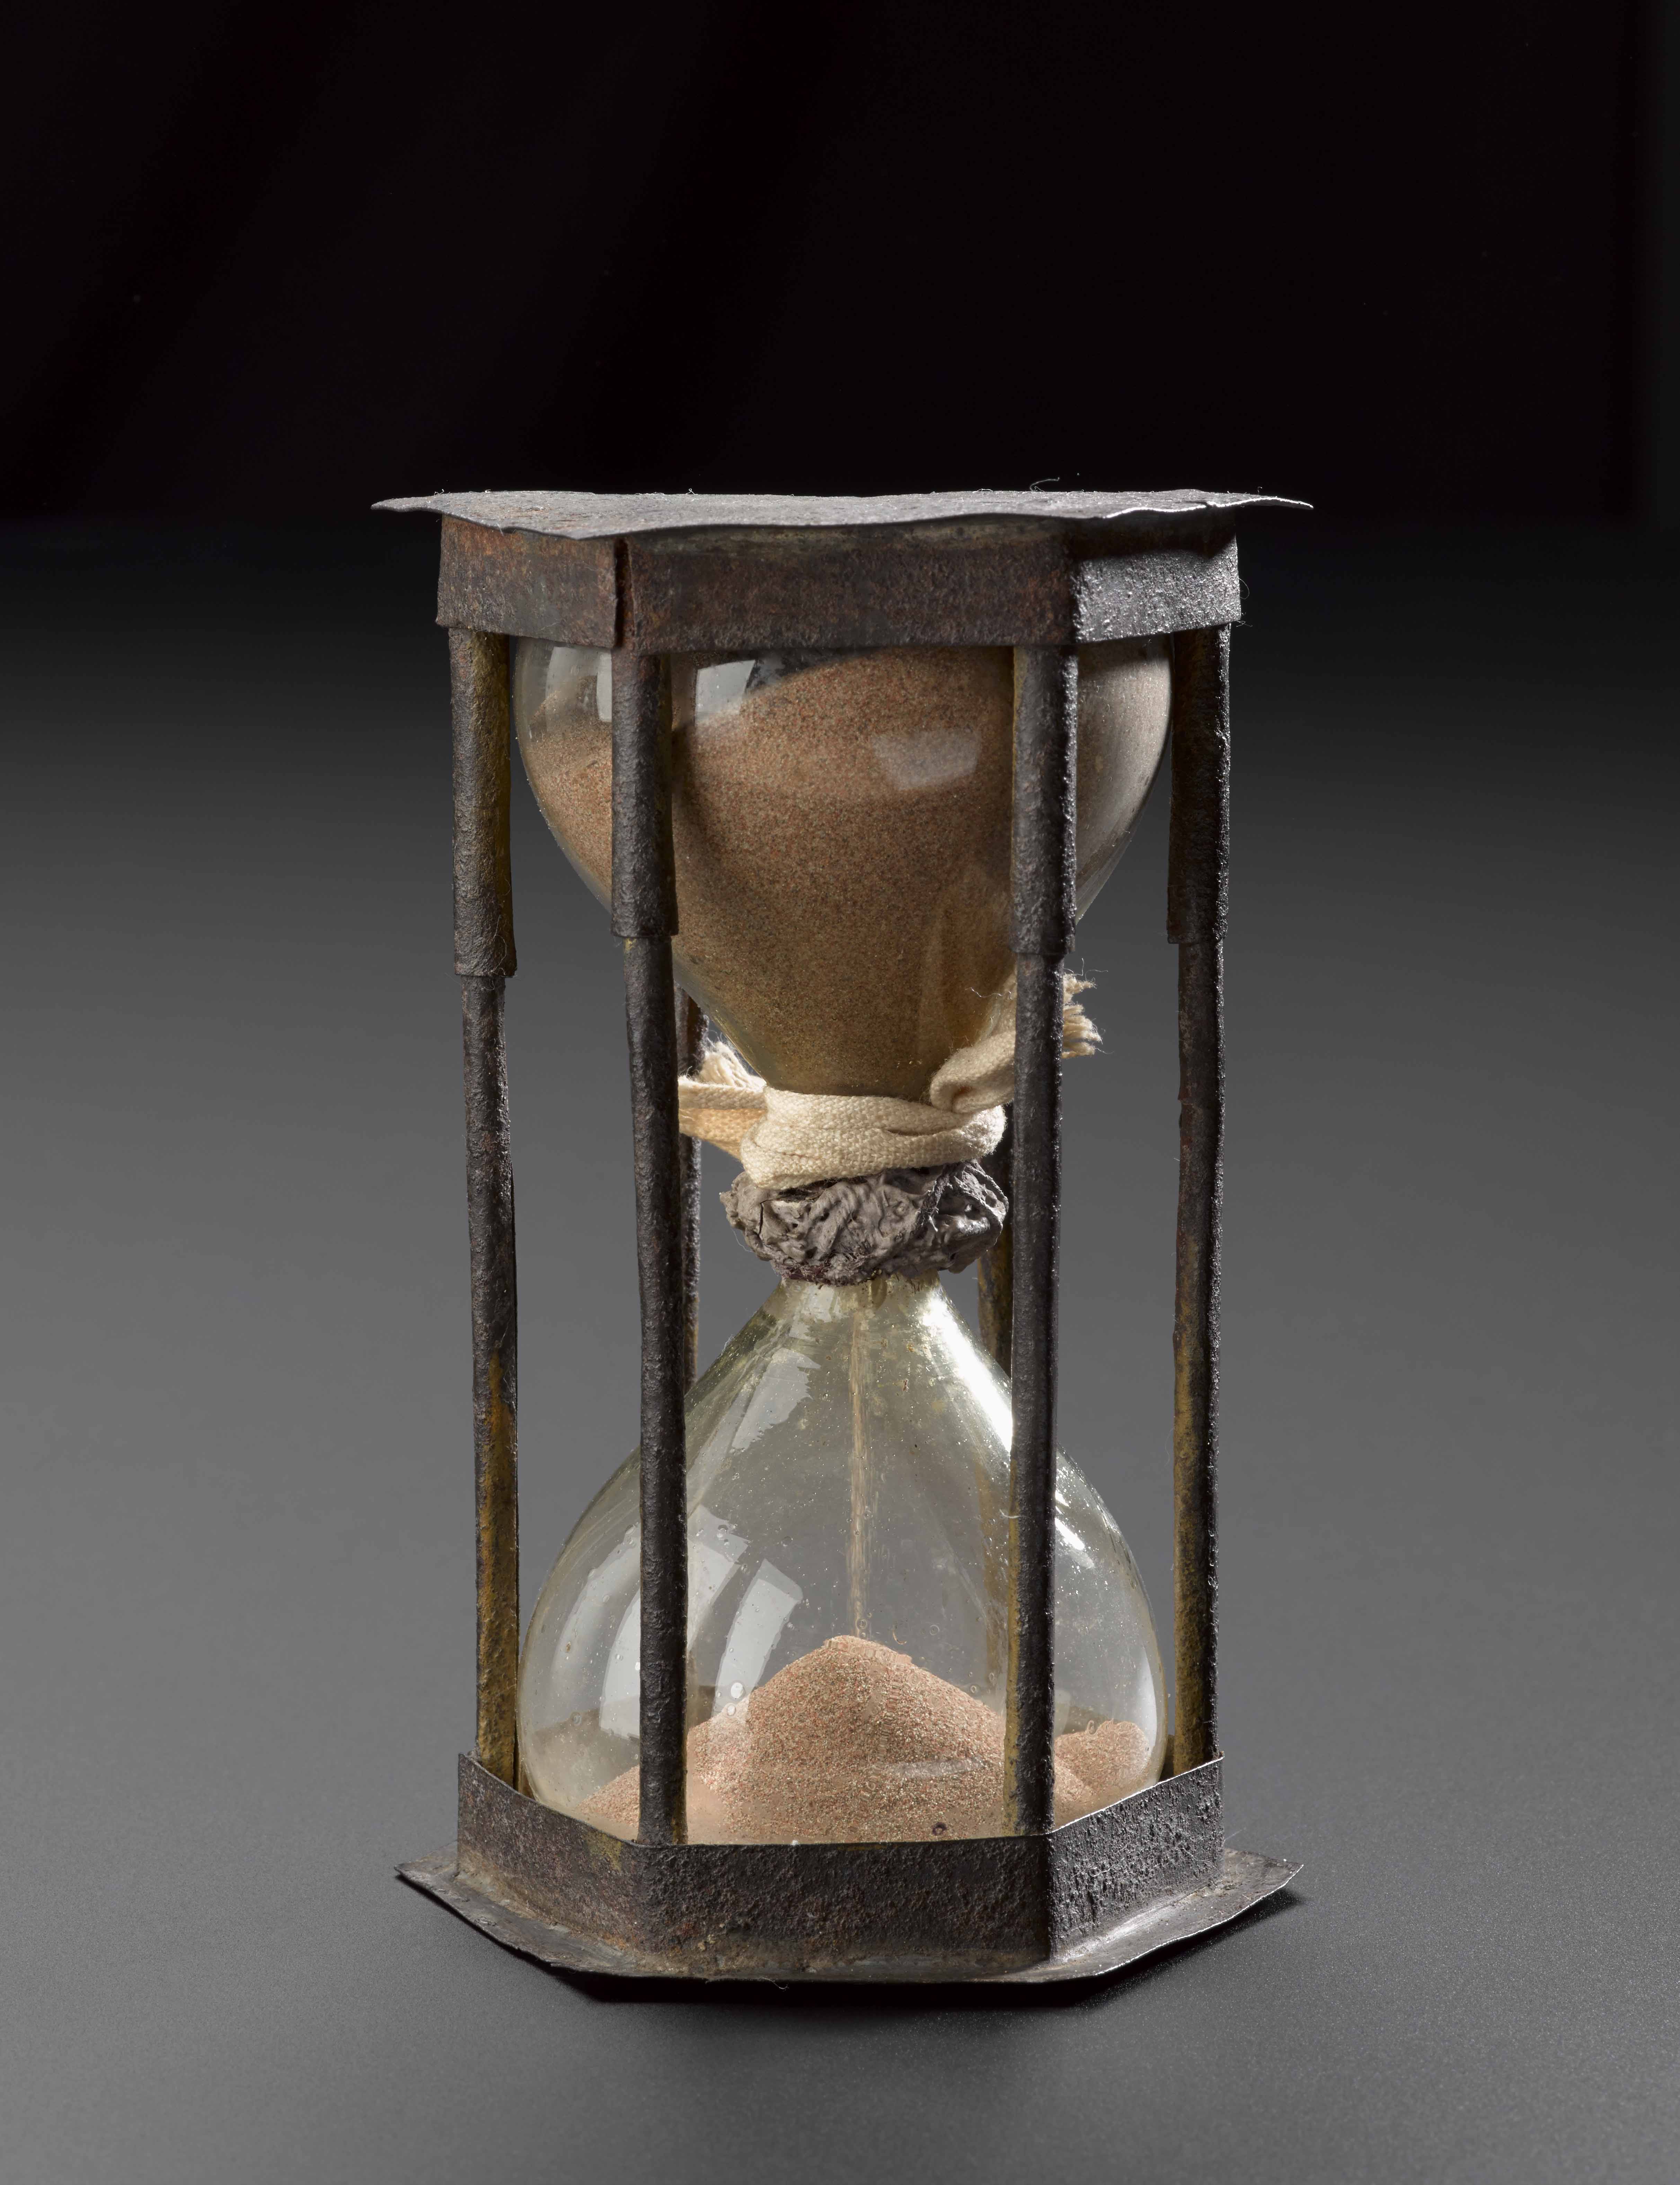 Sandglass, in metal frame, Galvani collection. Credit: Science Museum